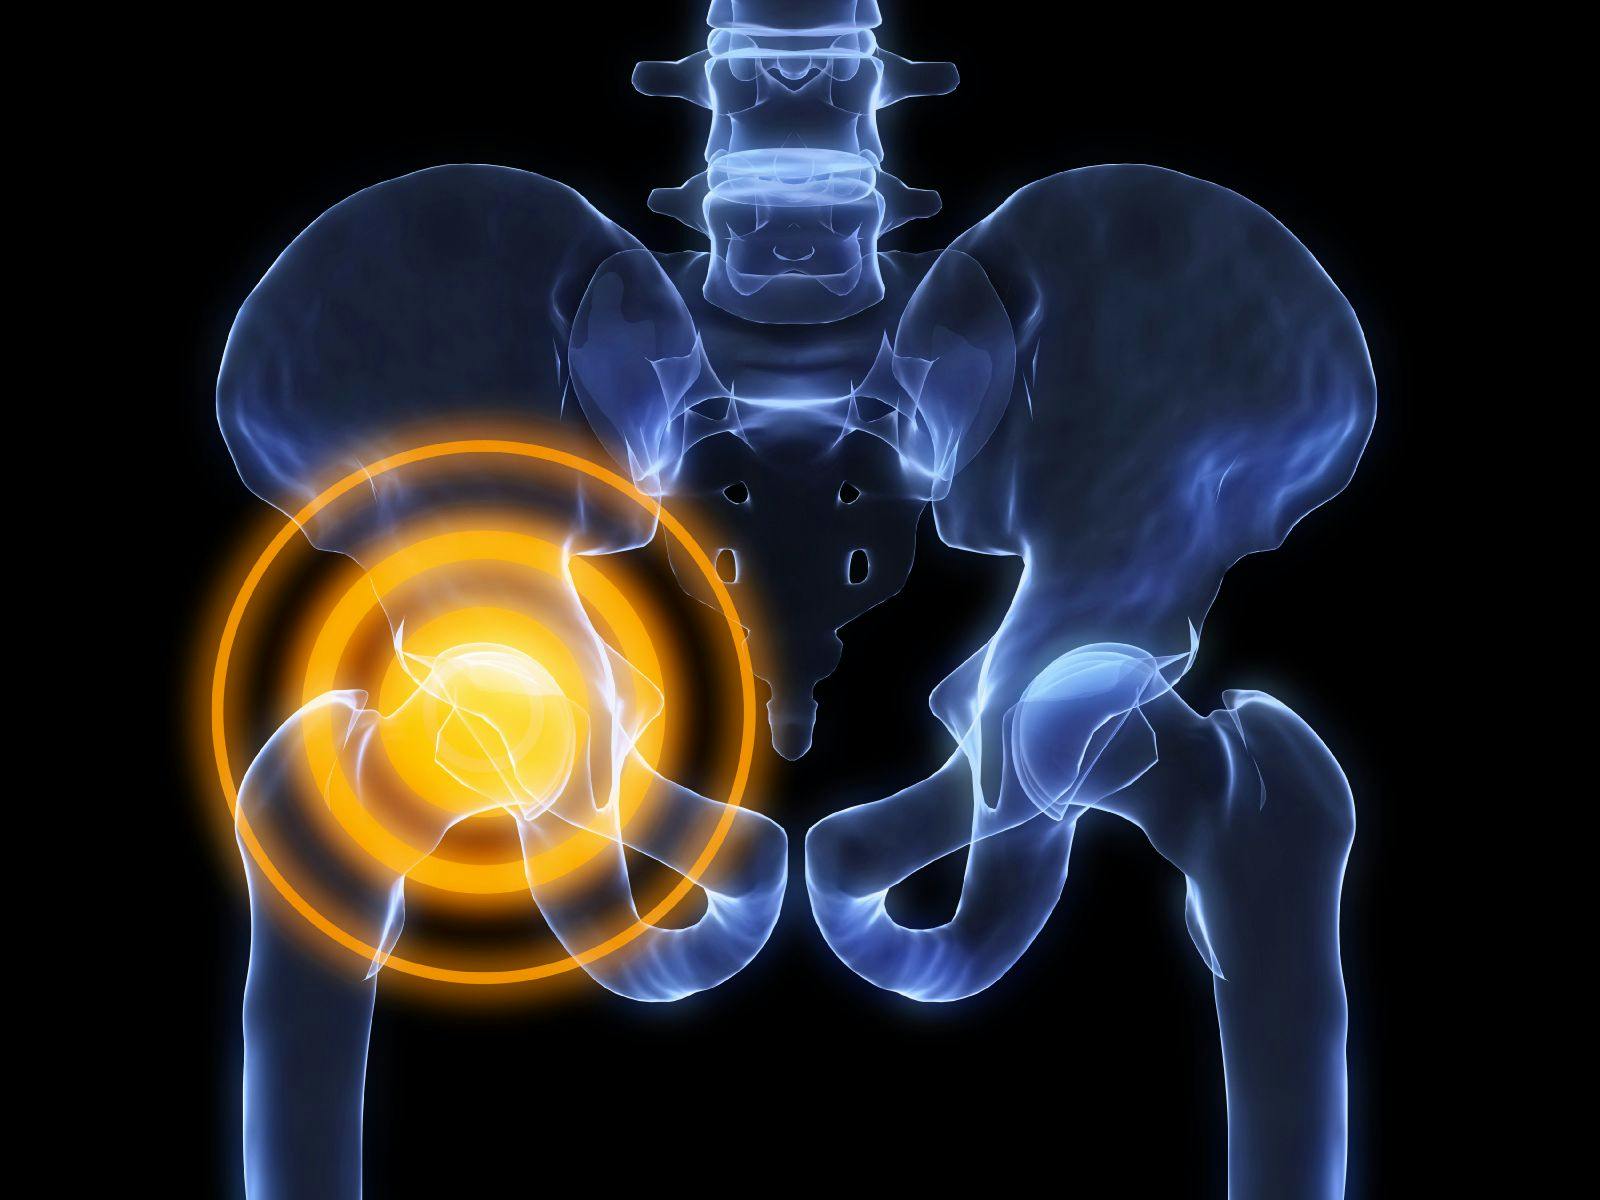 Osteoporosis Therapy Could Cut Need for Revision Procedures Following Hip Replacements